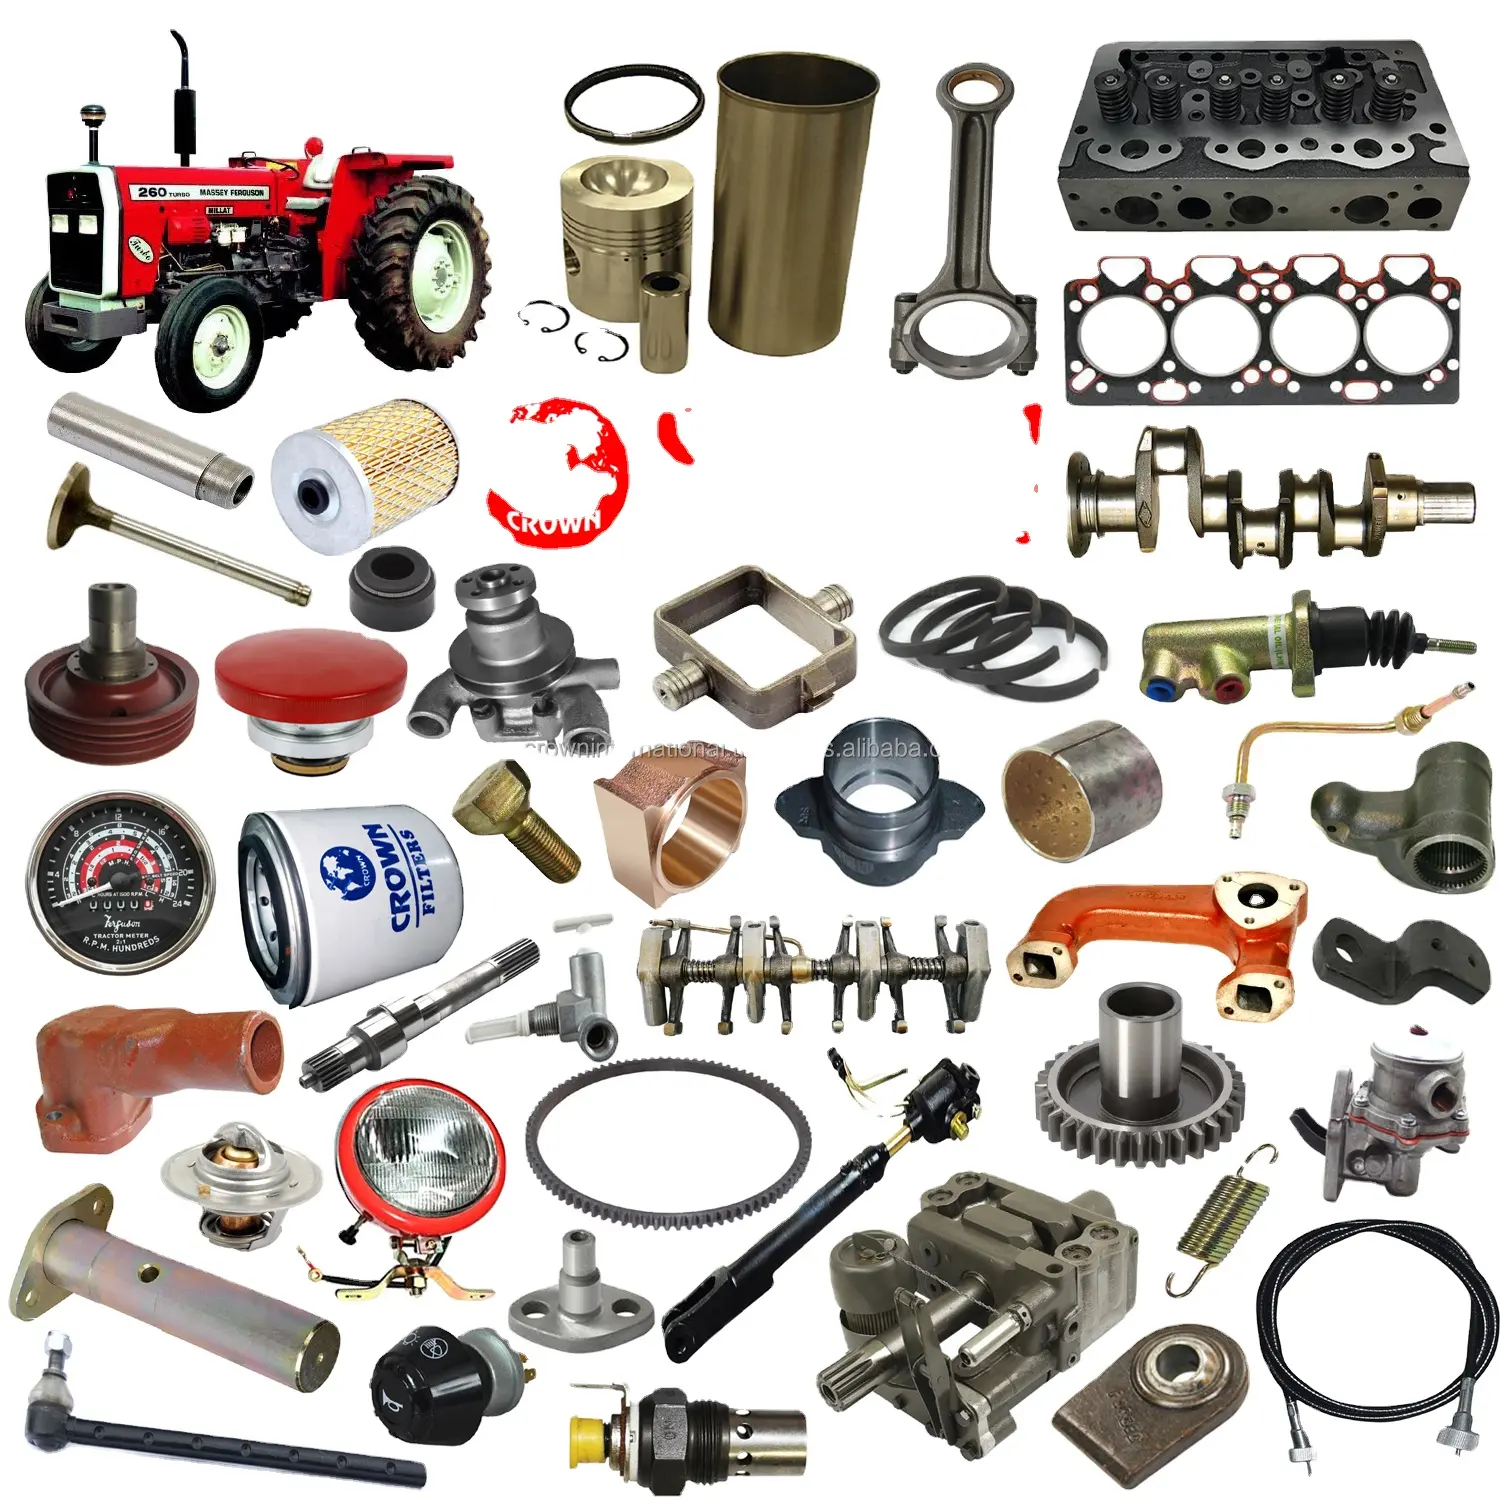 High Quality Replacement Spare Parts fits for Bush Hog lawn Tractor 2WD 4WD in whole sale price example